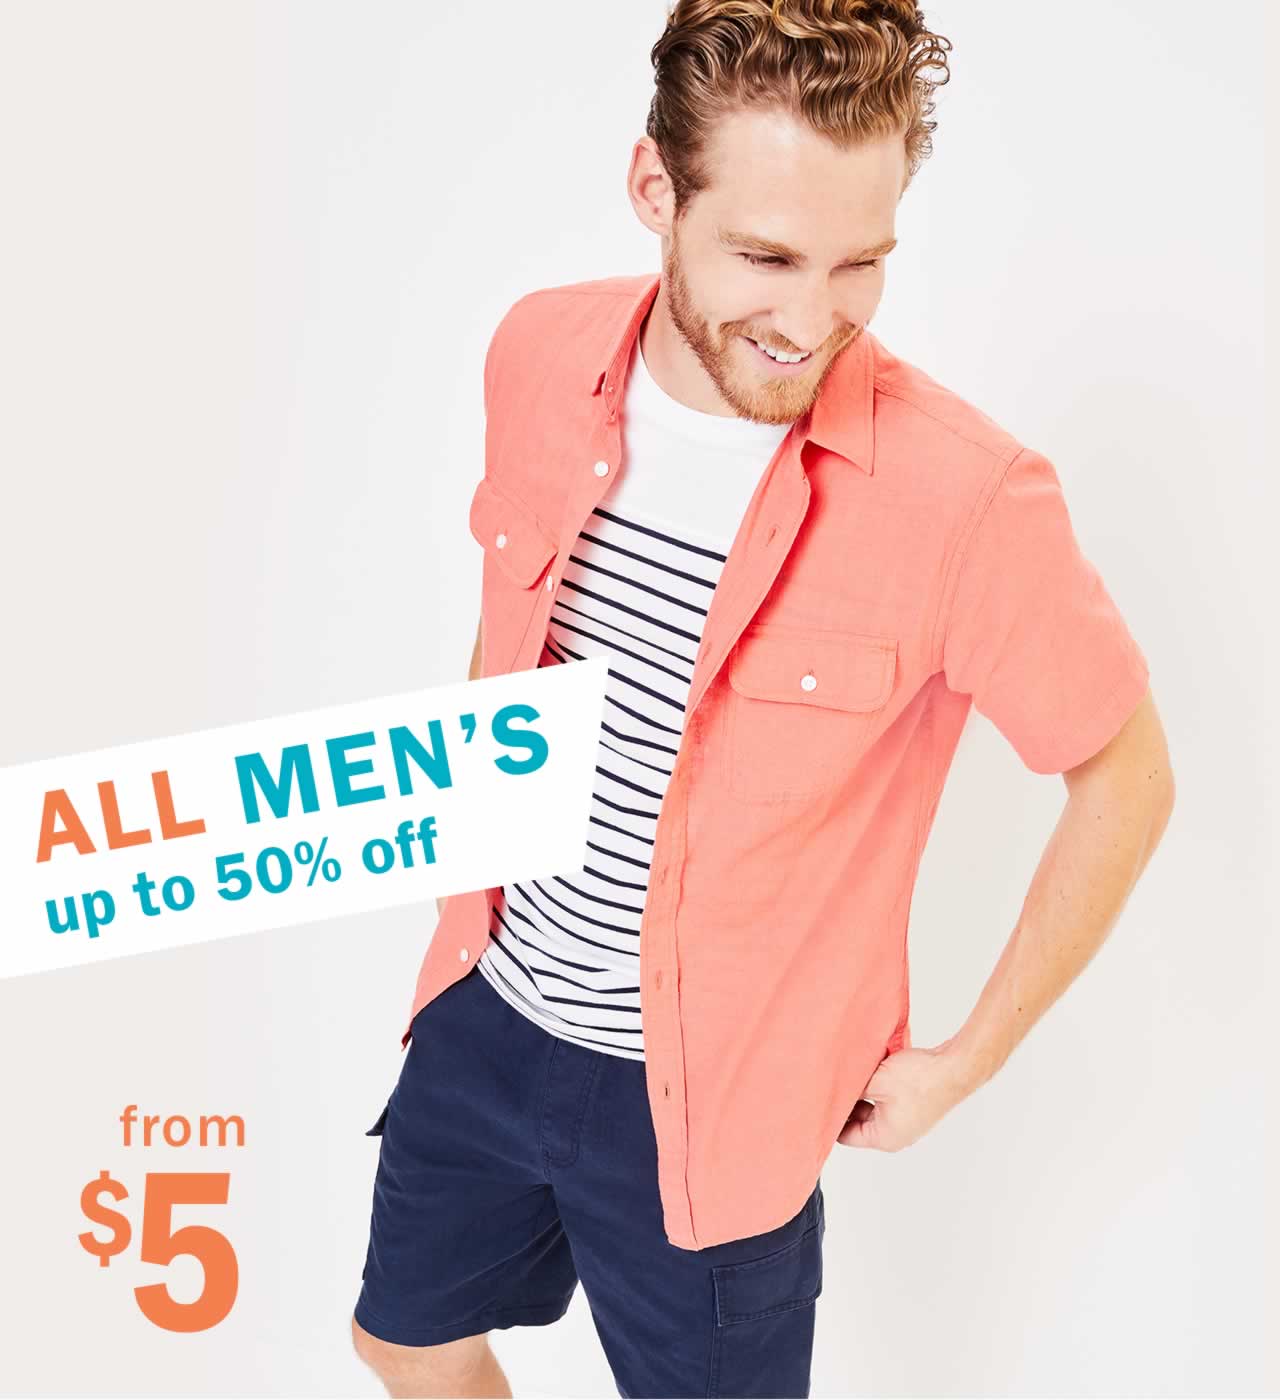 ALL MEN's up to 50% off from $5